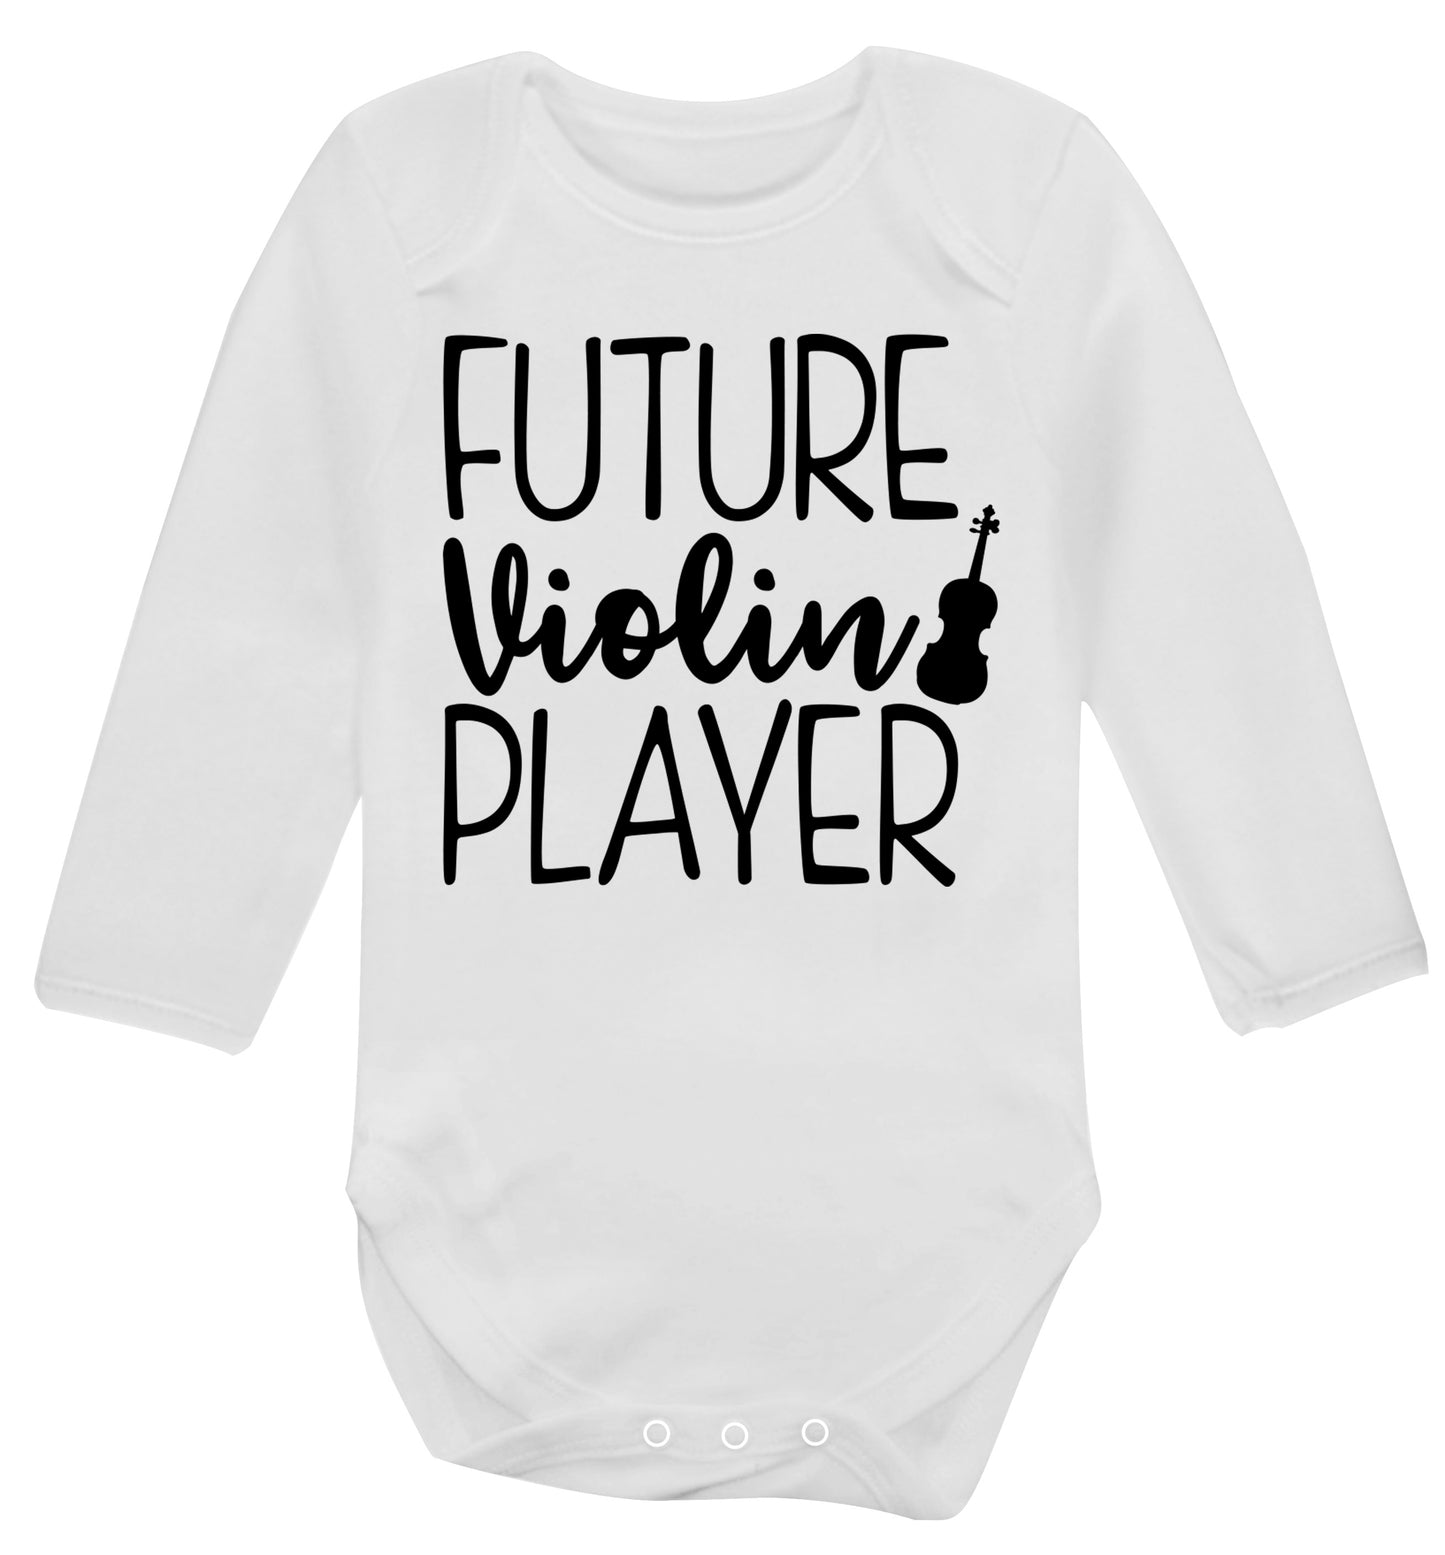 Future Violin Player Baby Vest long sleeved white 6-12 months